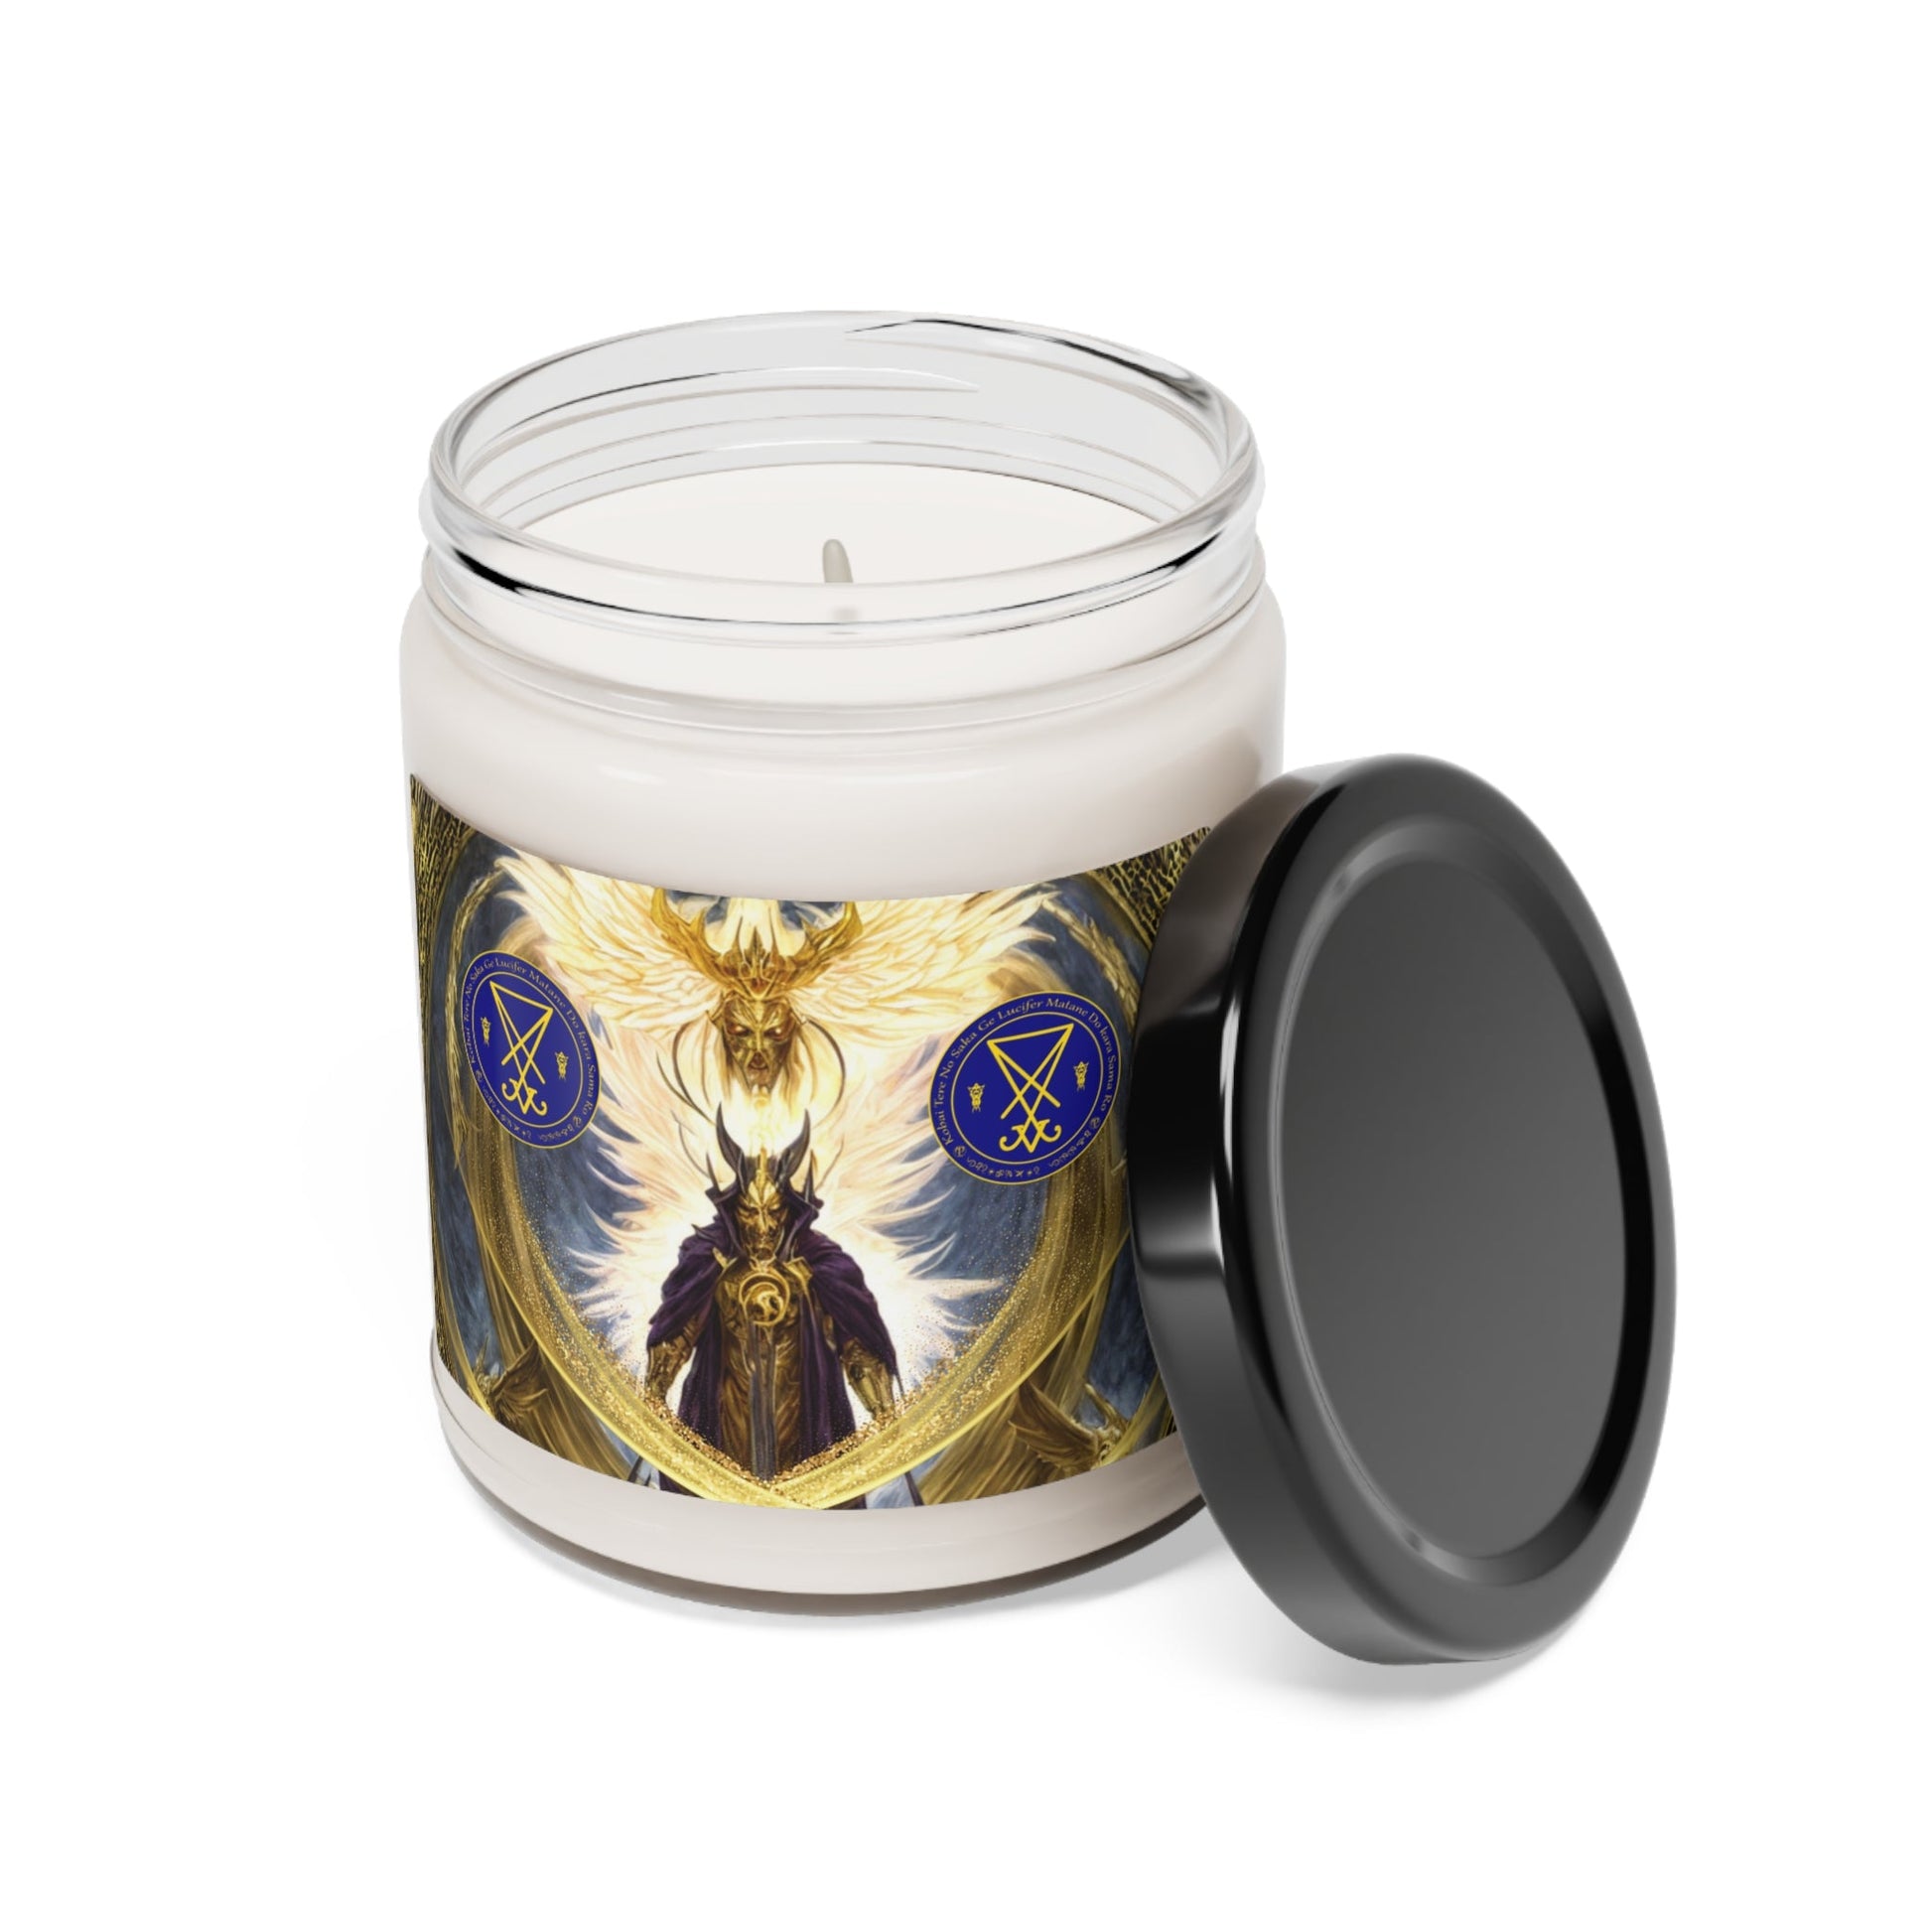 Demon-Lucifer-Scented-Soy-Candle-for-Altar-offerings-rituals-initiations-or-praying-and-meditation-2